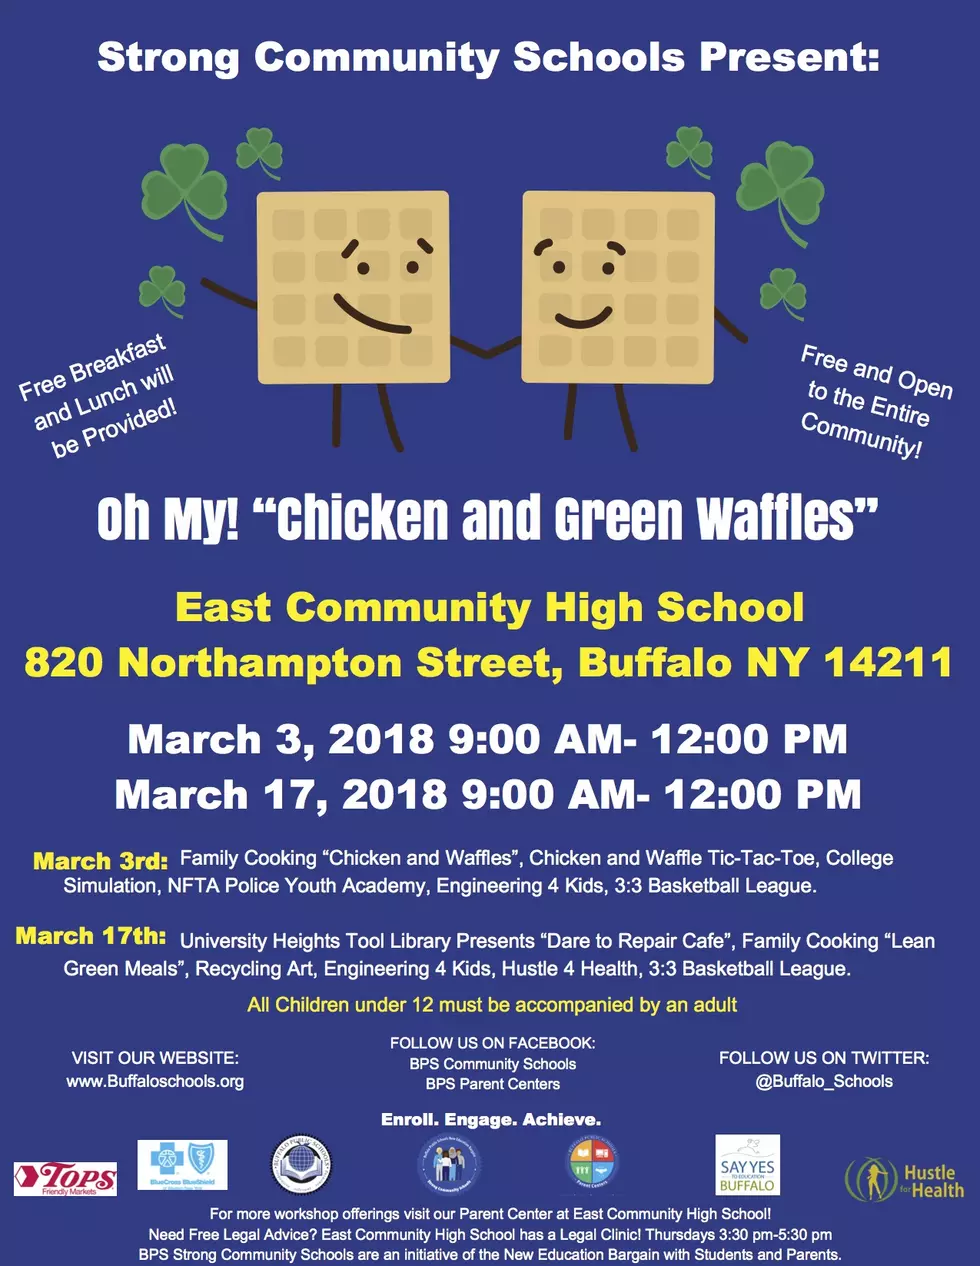 Strong Community Schools Present &#8220;Oh My Chicken and Green Waffles&#8221;